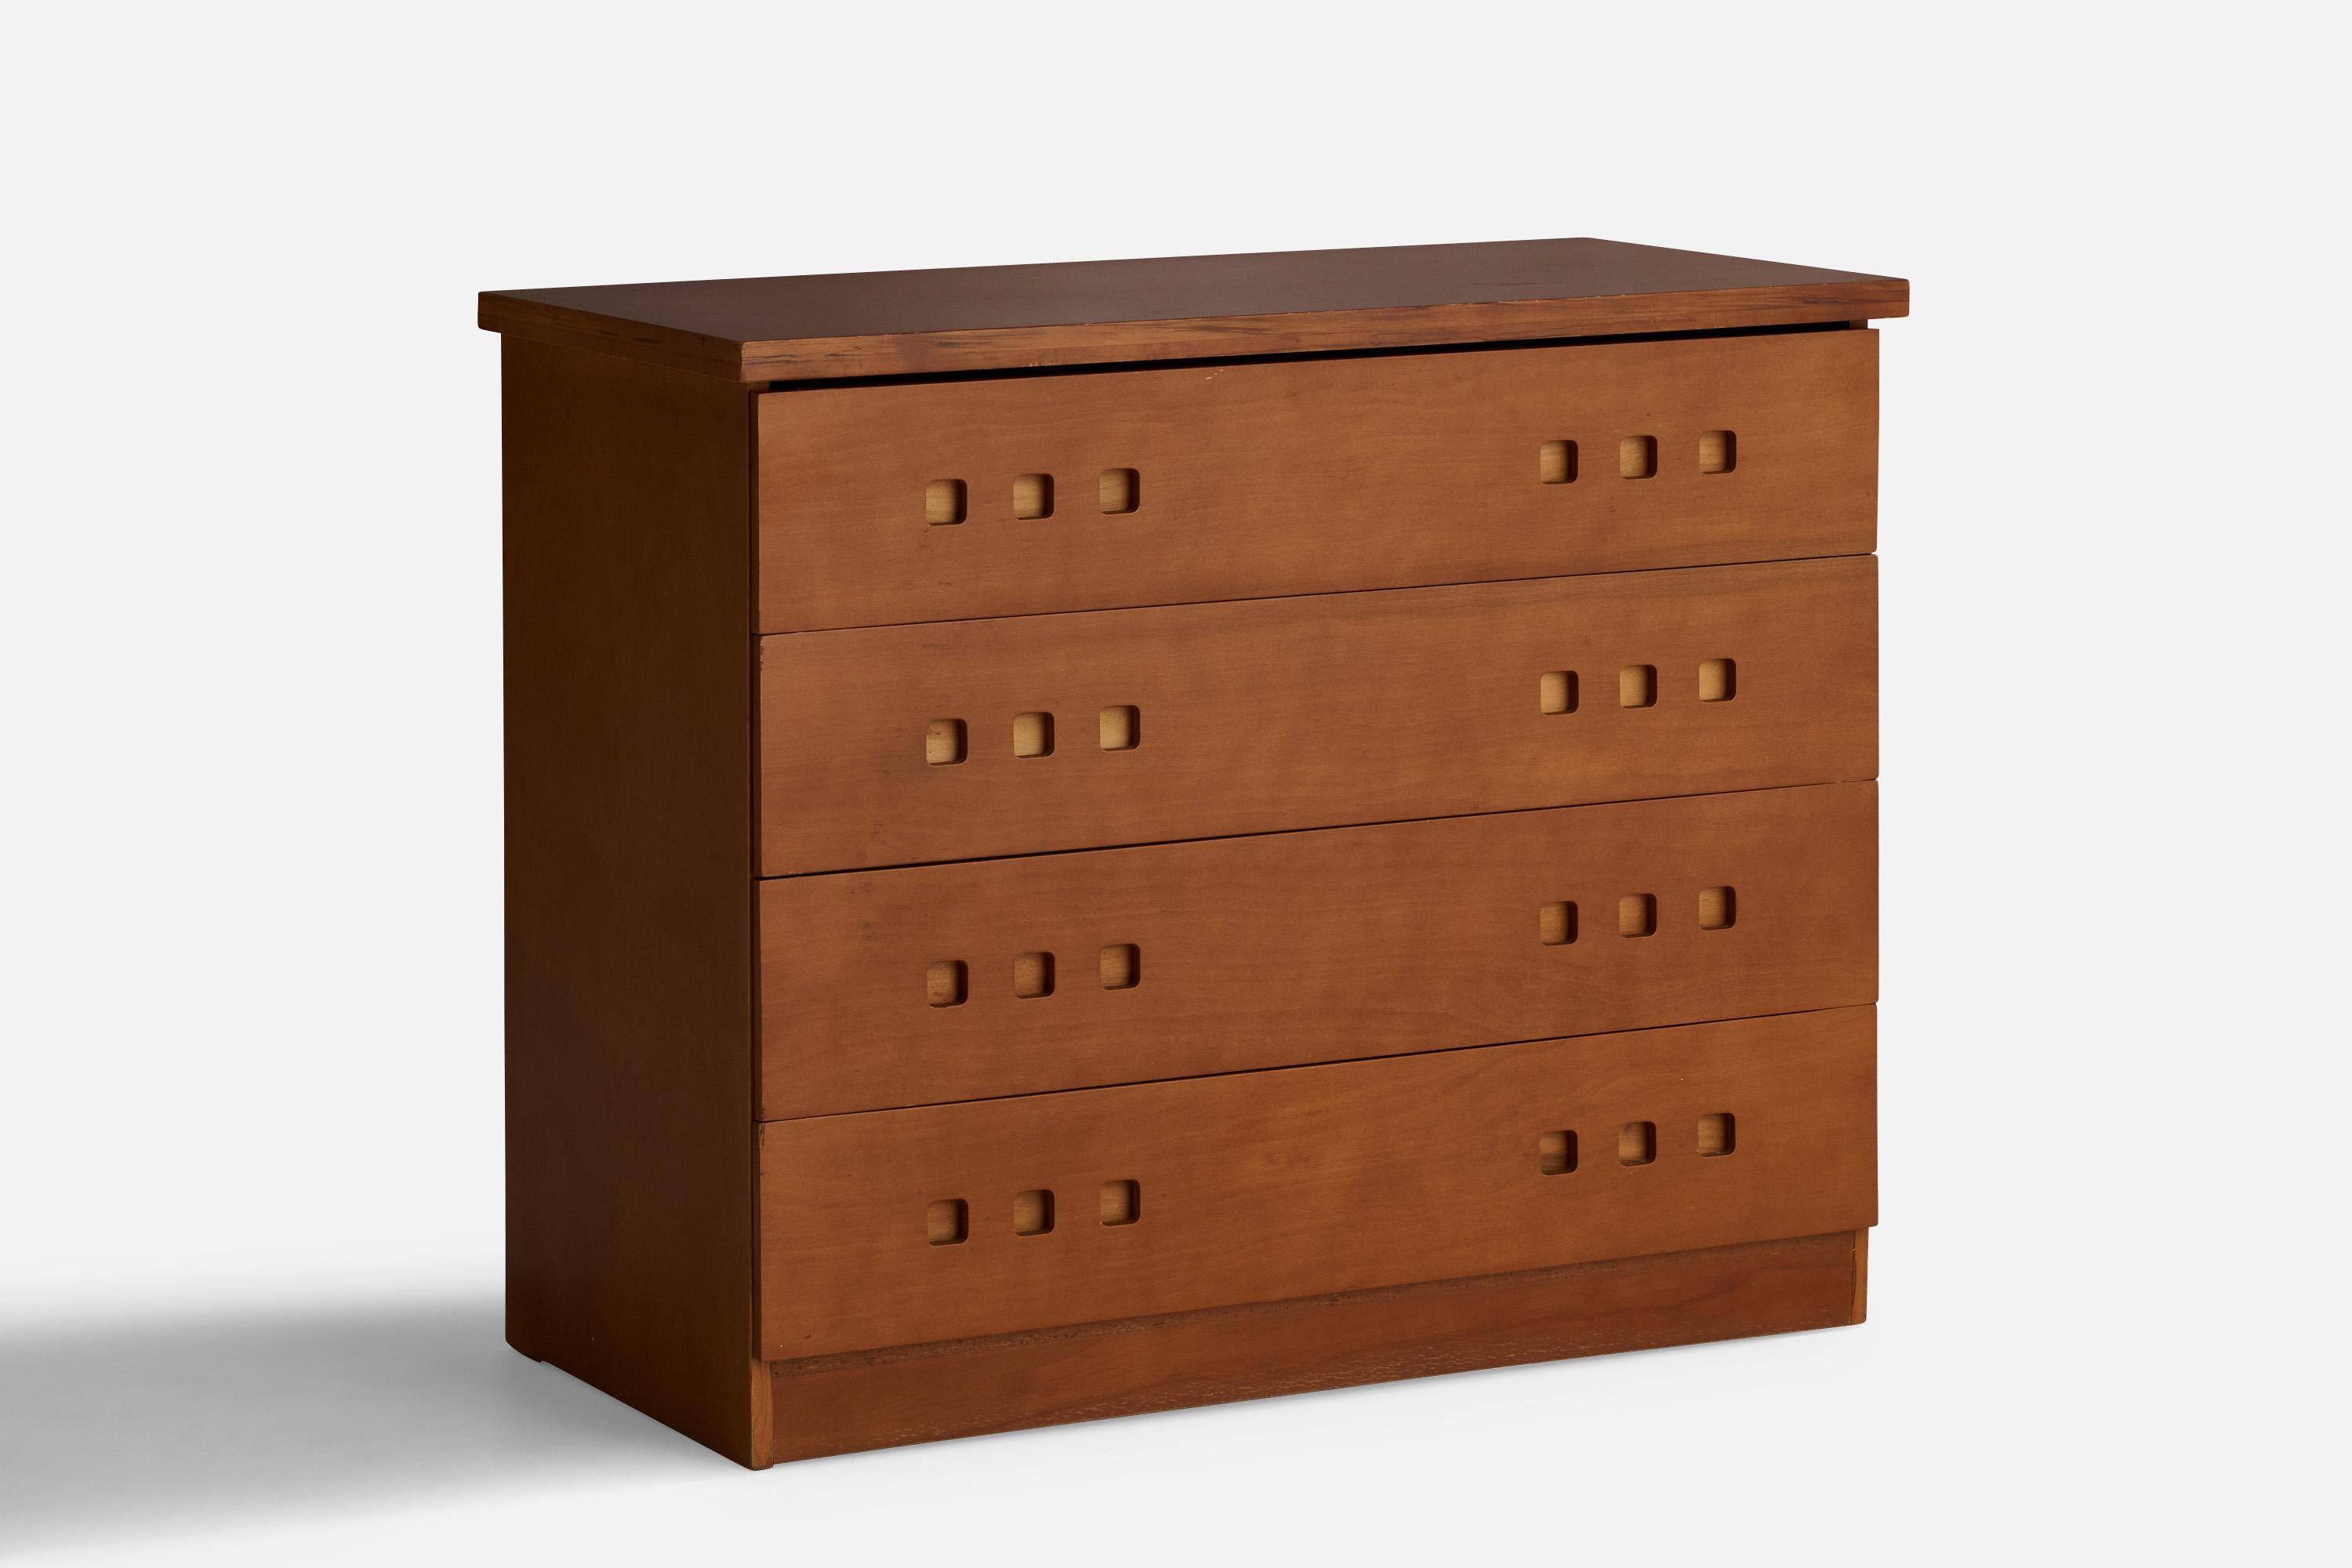 A wood-veneered chest of drawers or commode designed and produced in Italy, 1950s.